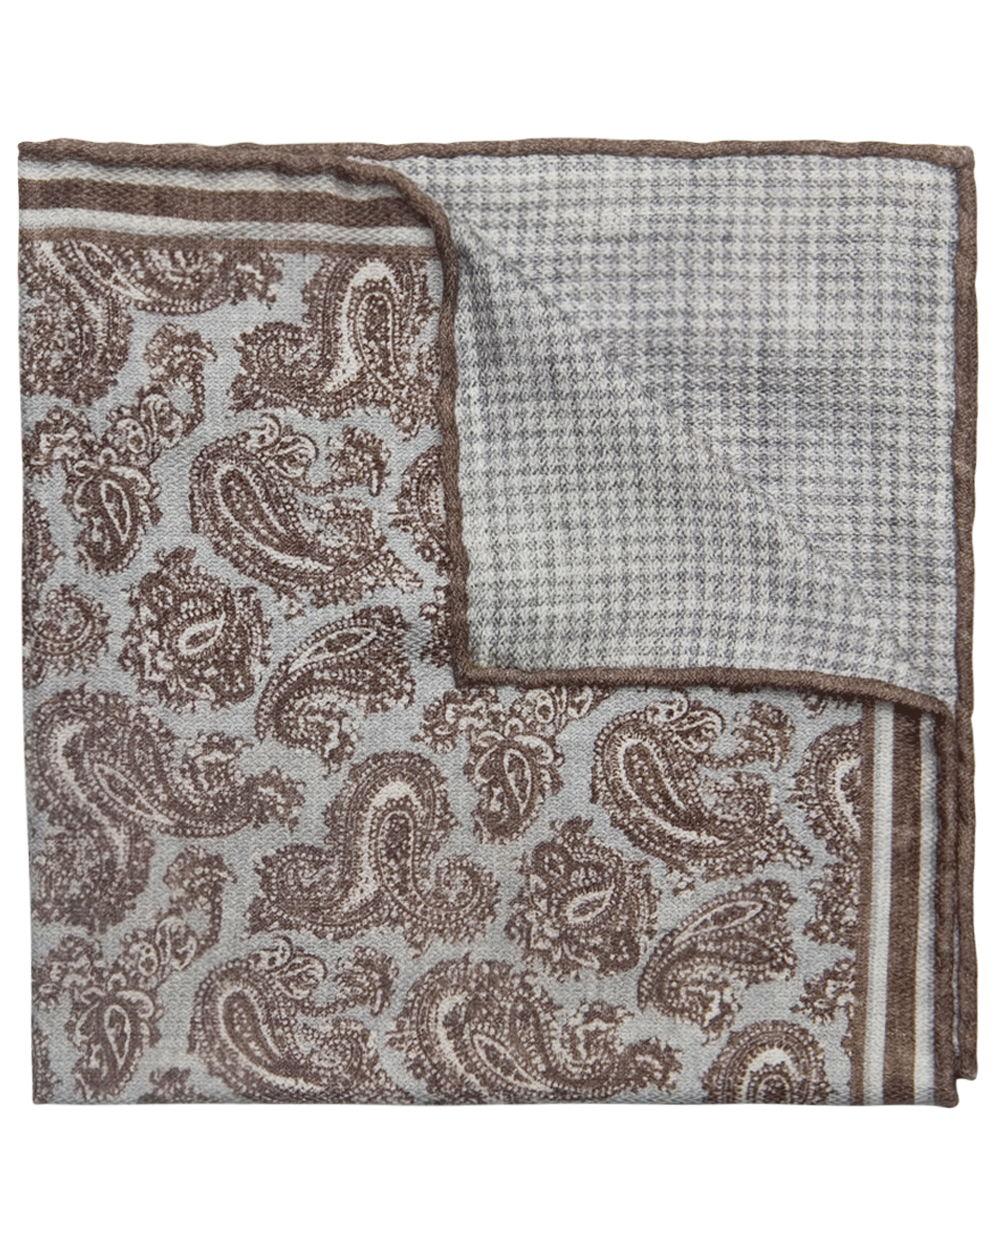 Brown and Grey Floral Pocket Square